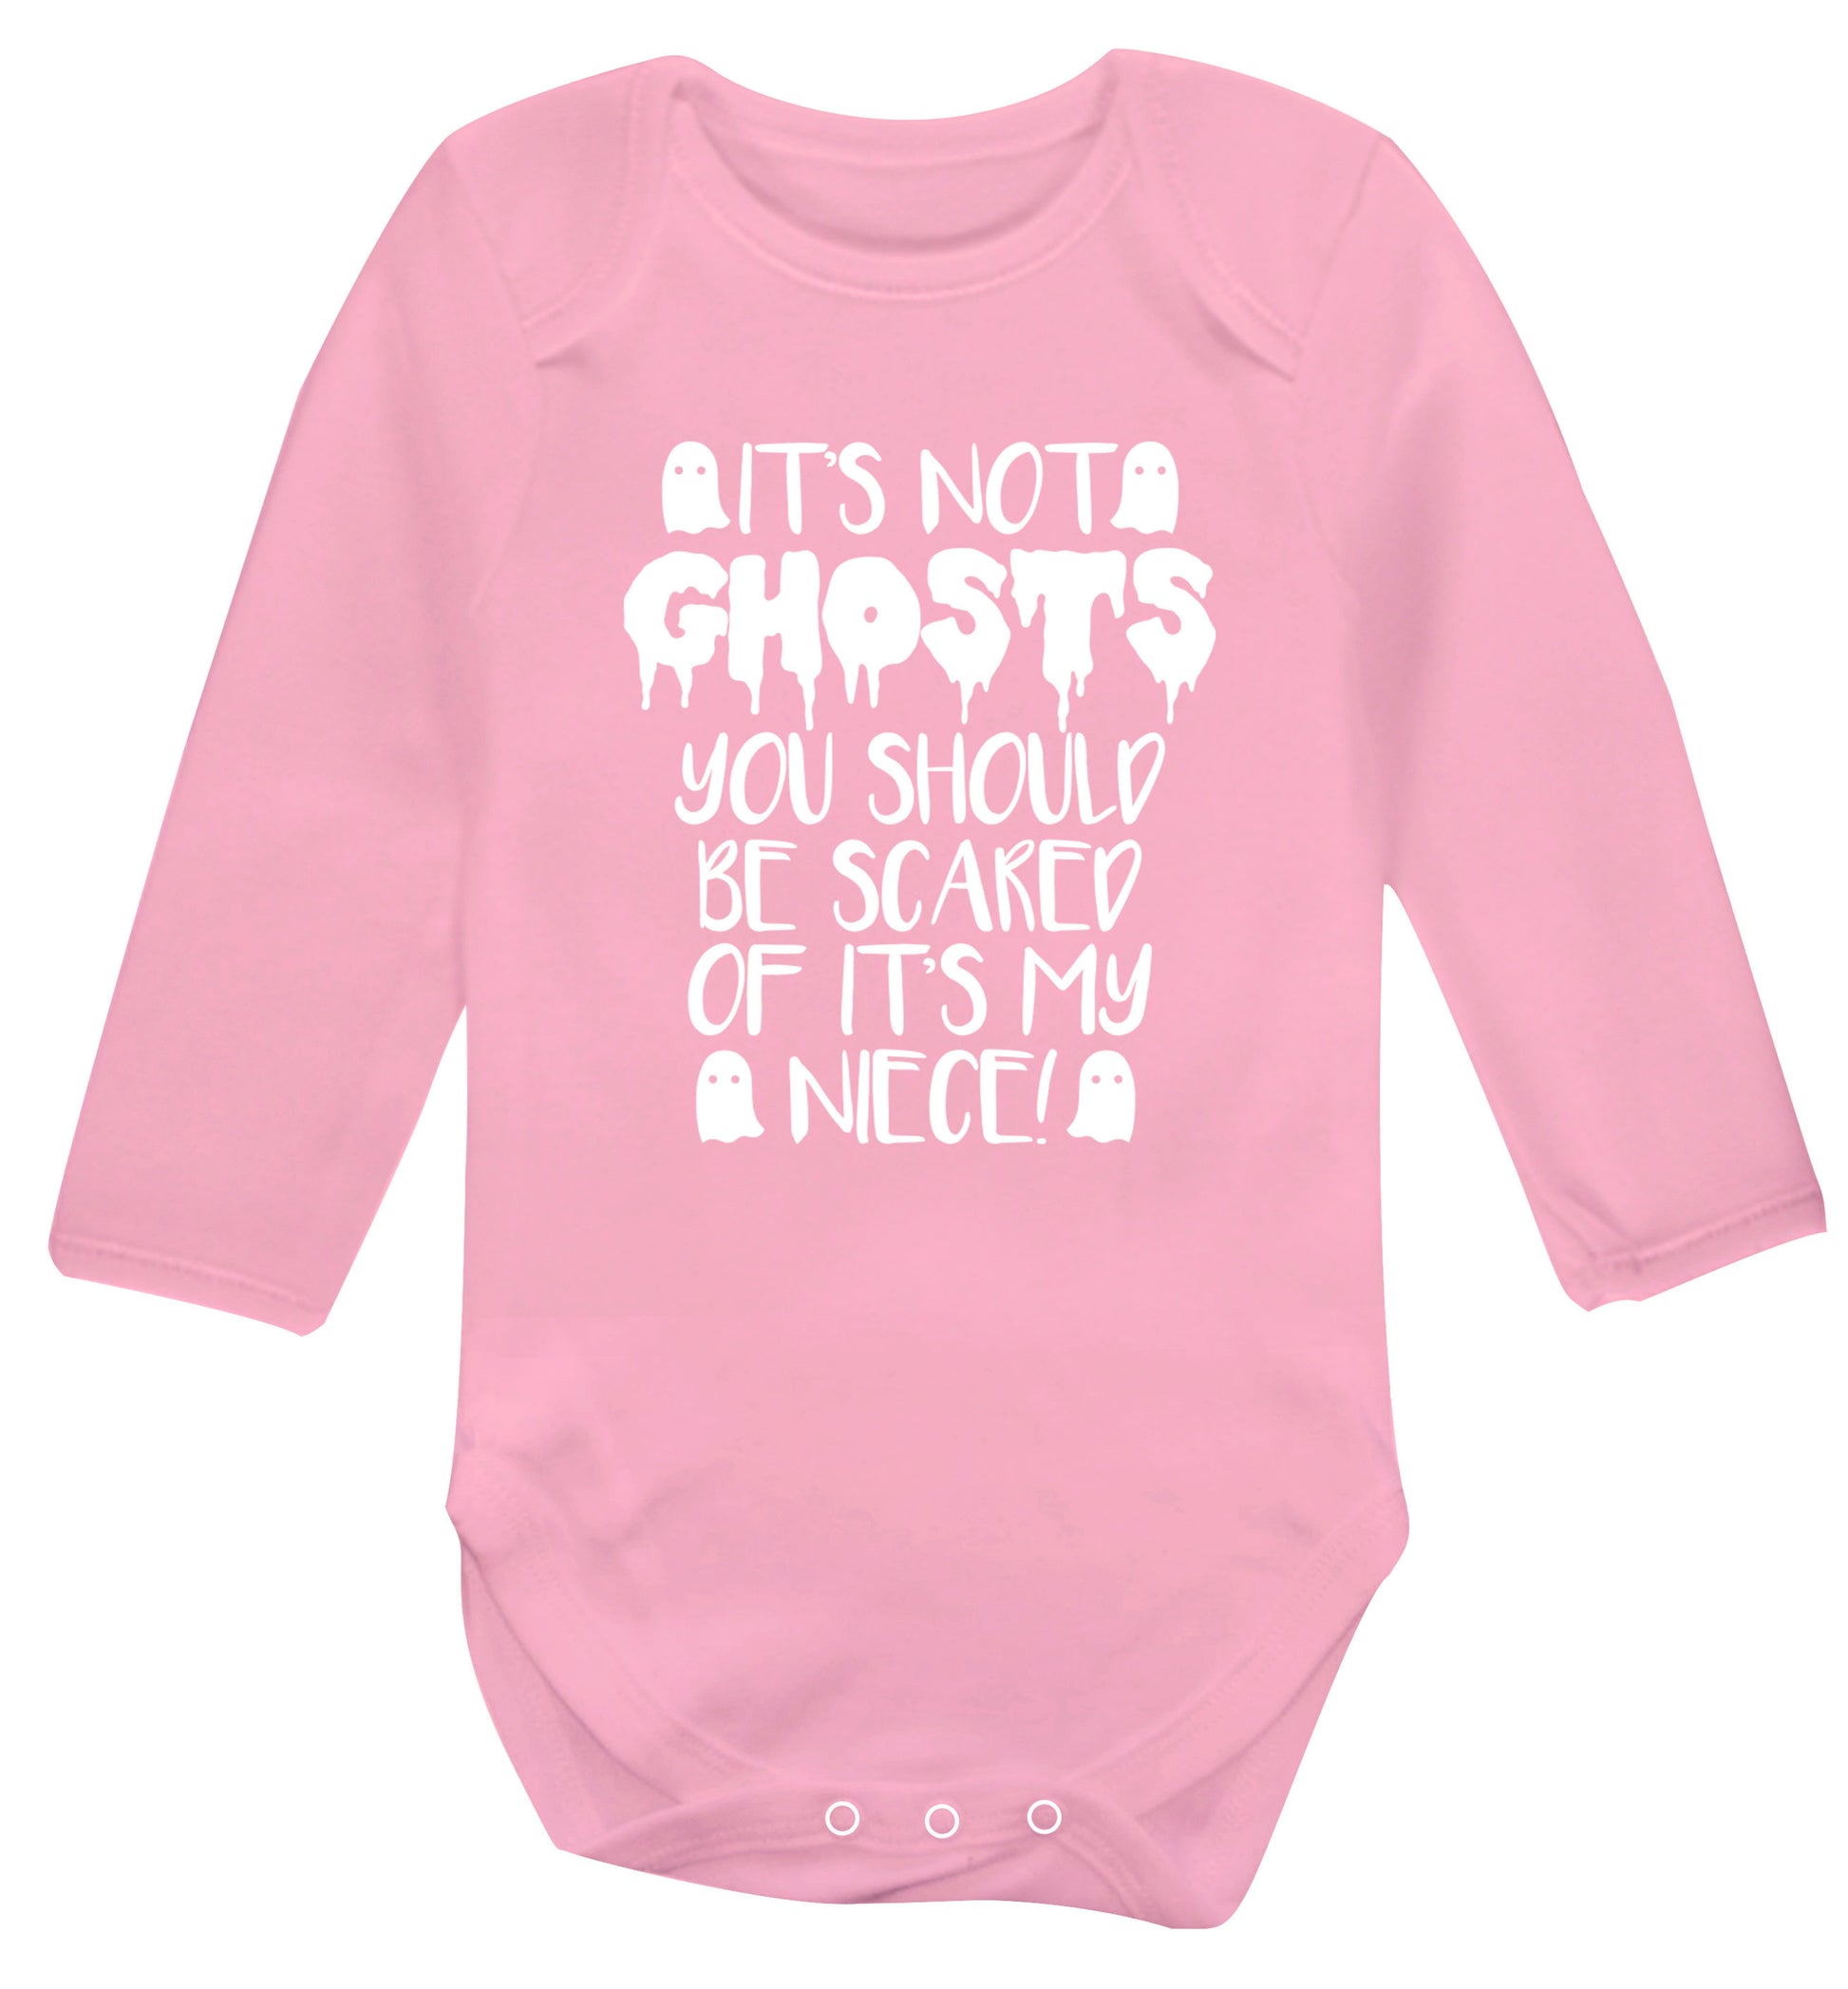 It's not ghosts you should be scared of it's my niece! Baby Vest long sleeved pale pink 6-12 months